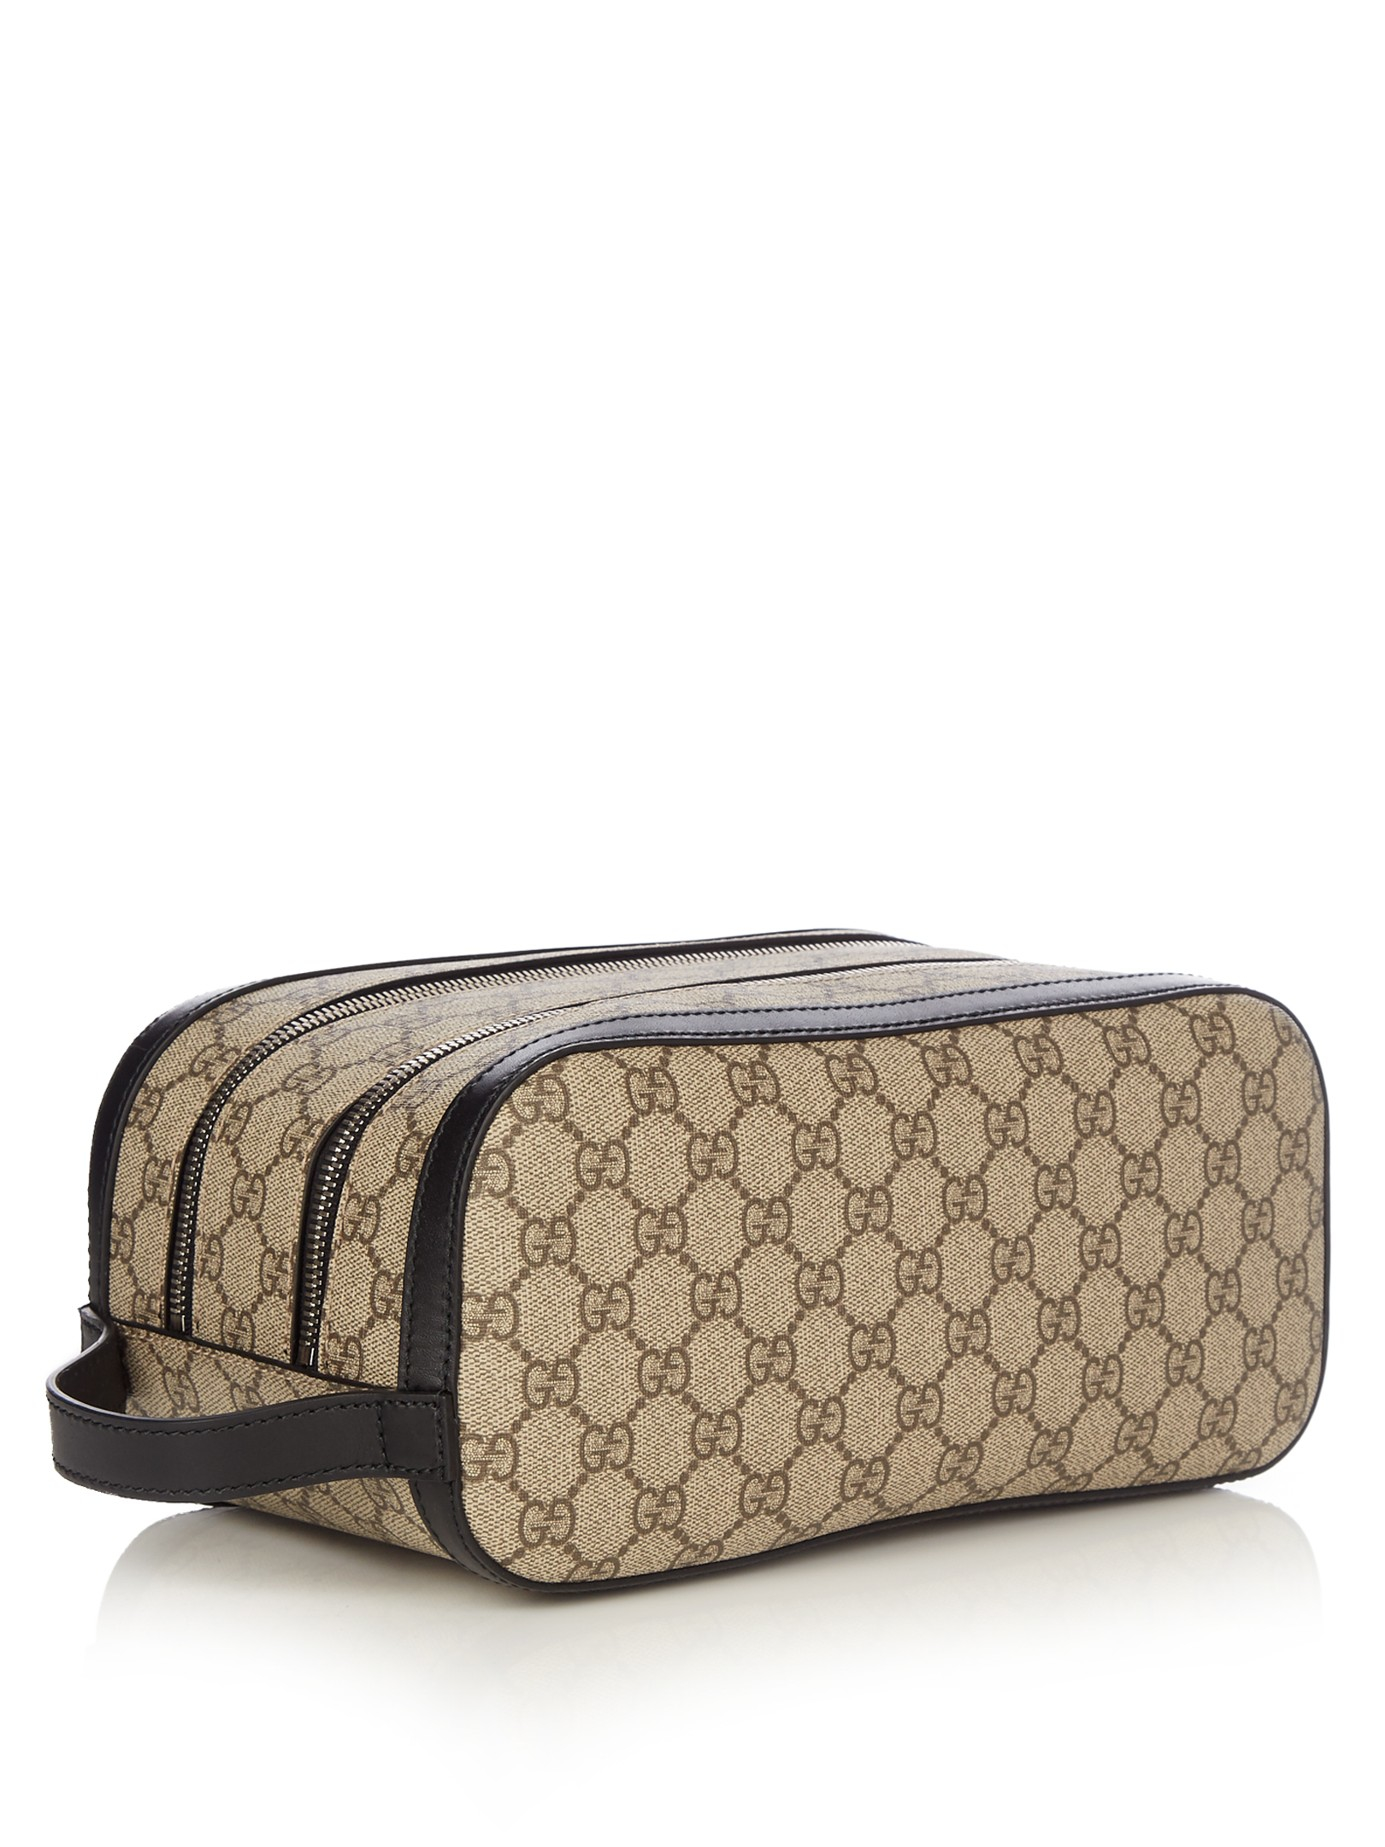 gucci toiletry bag mens, OFF 73%,www 